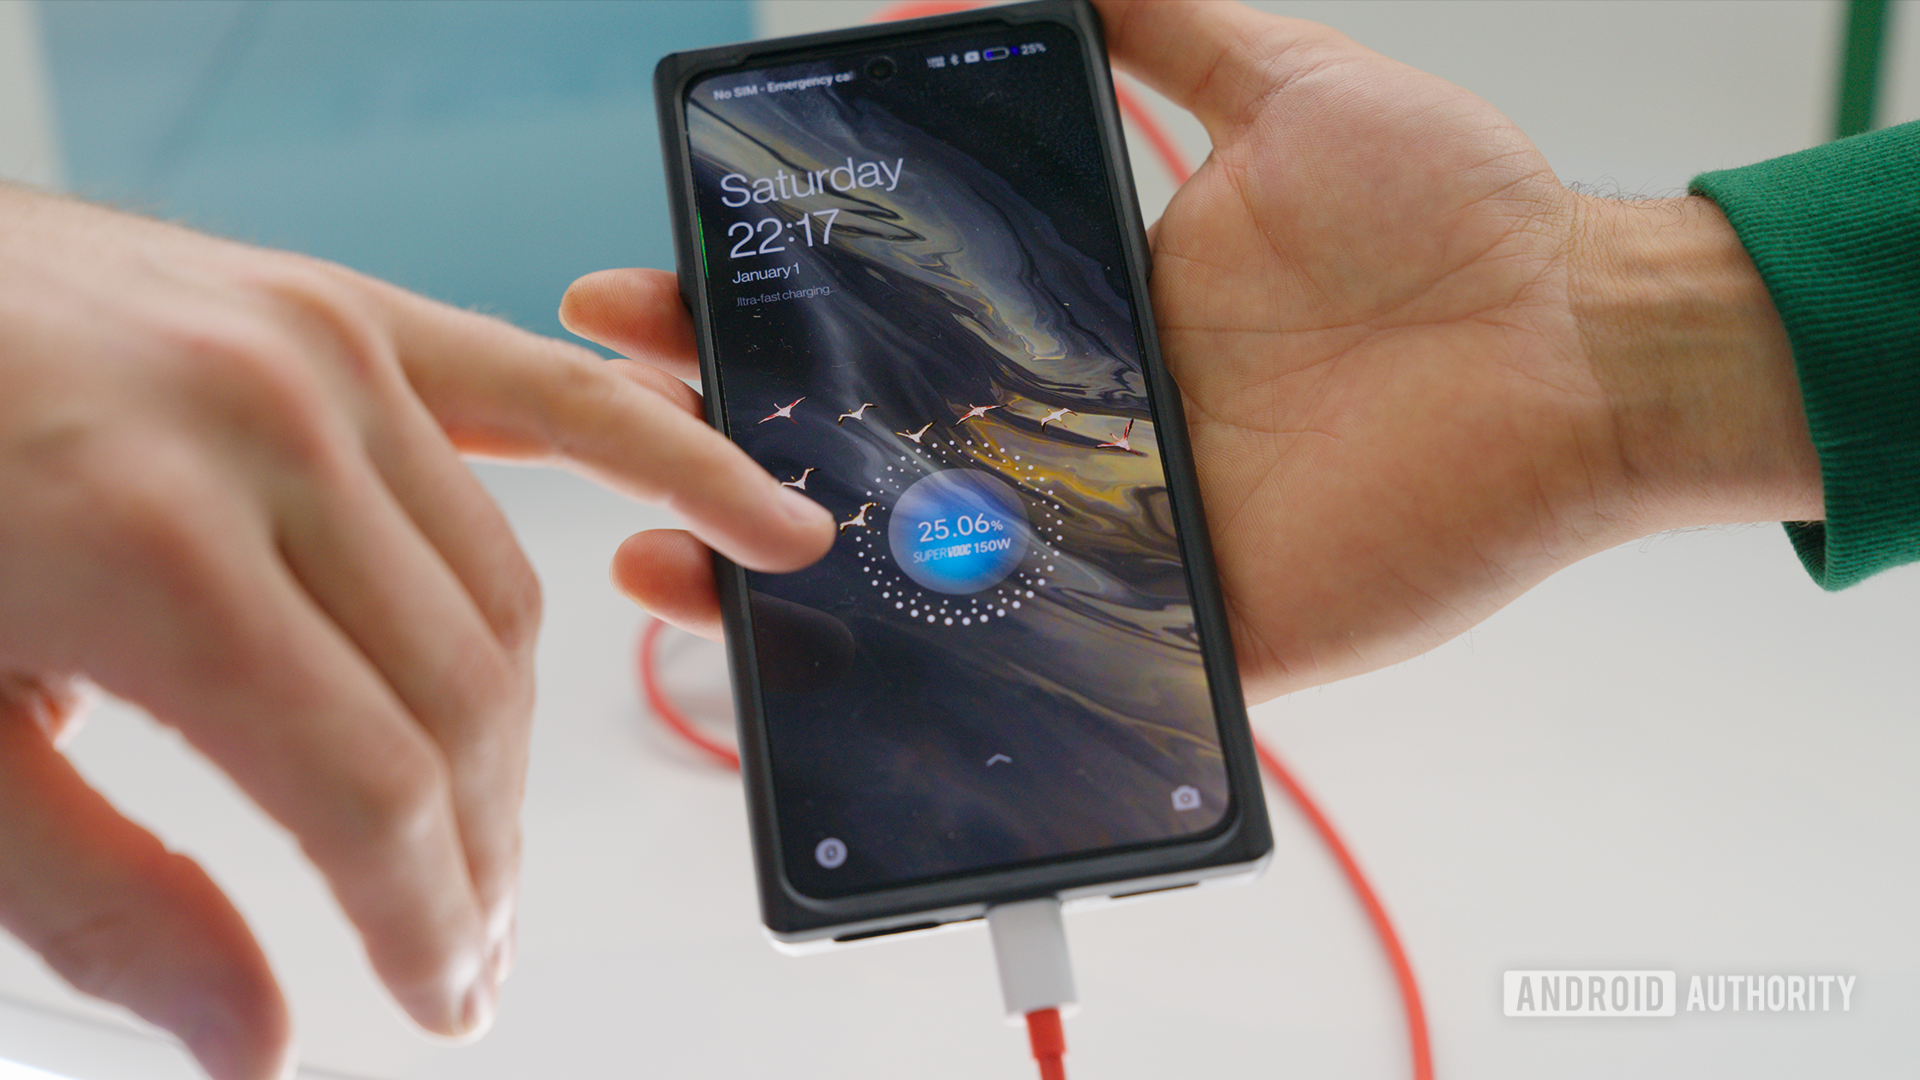 Oppo is charging the phone using SuperVOOC.